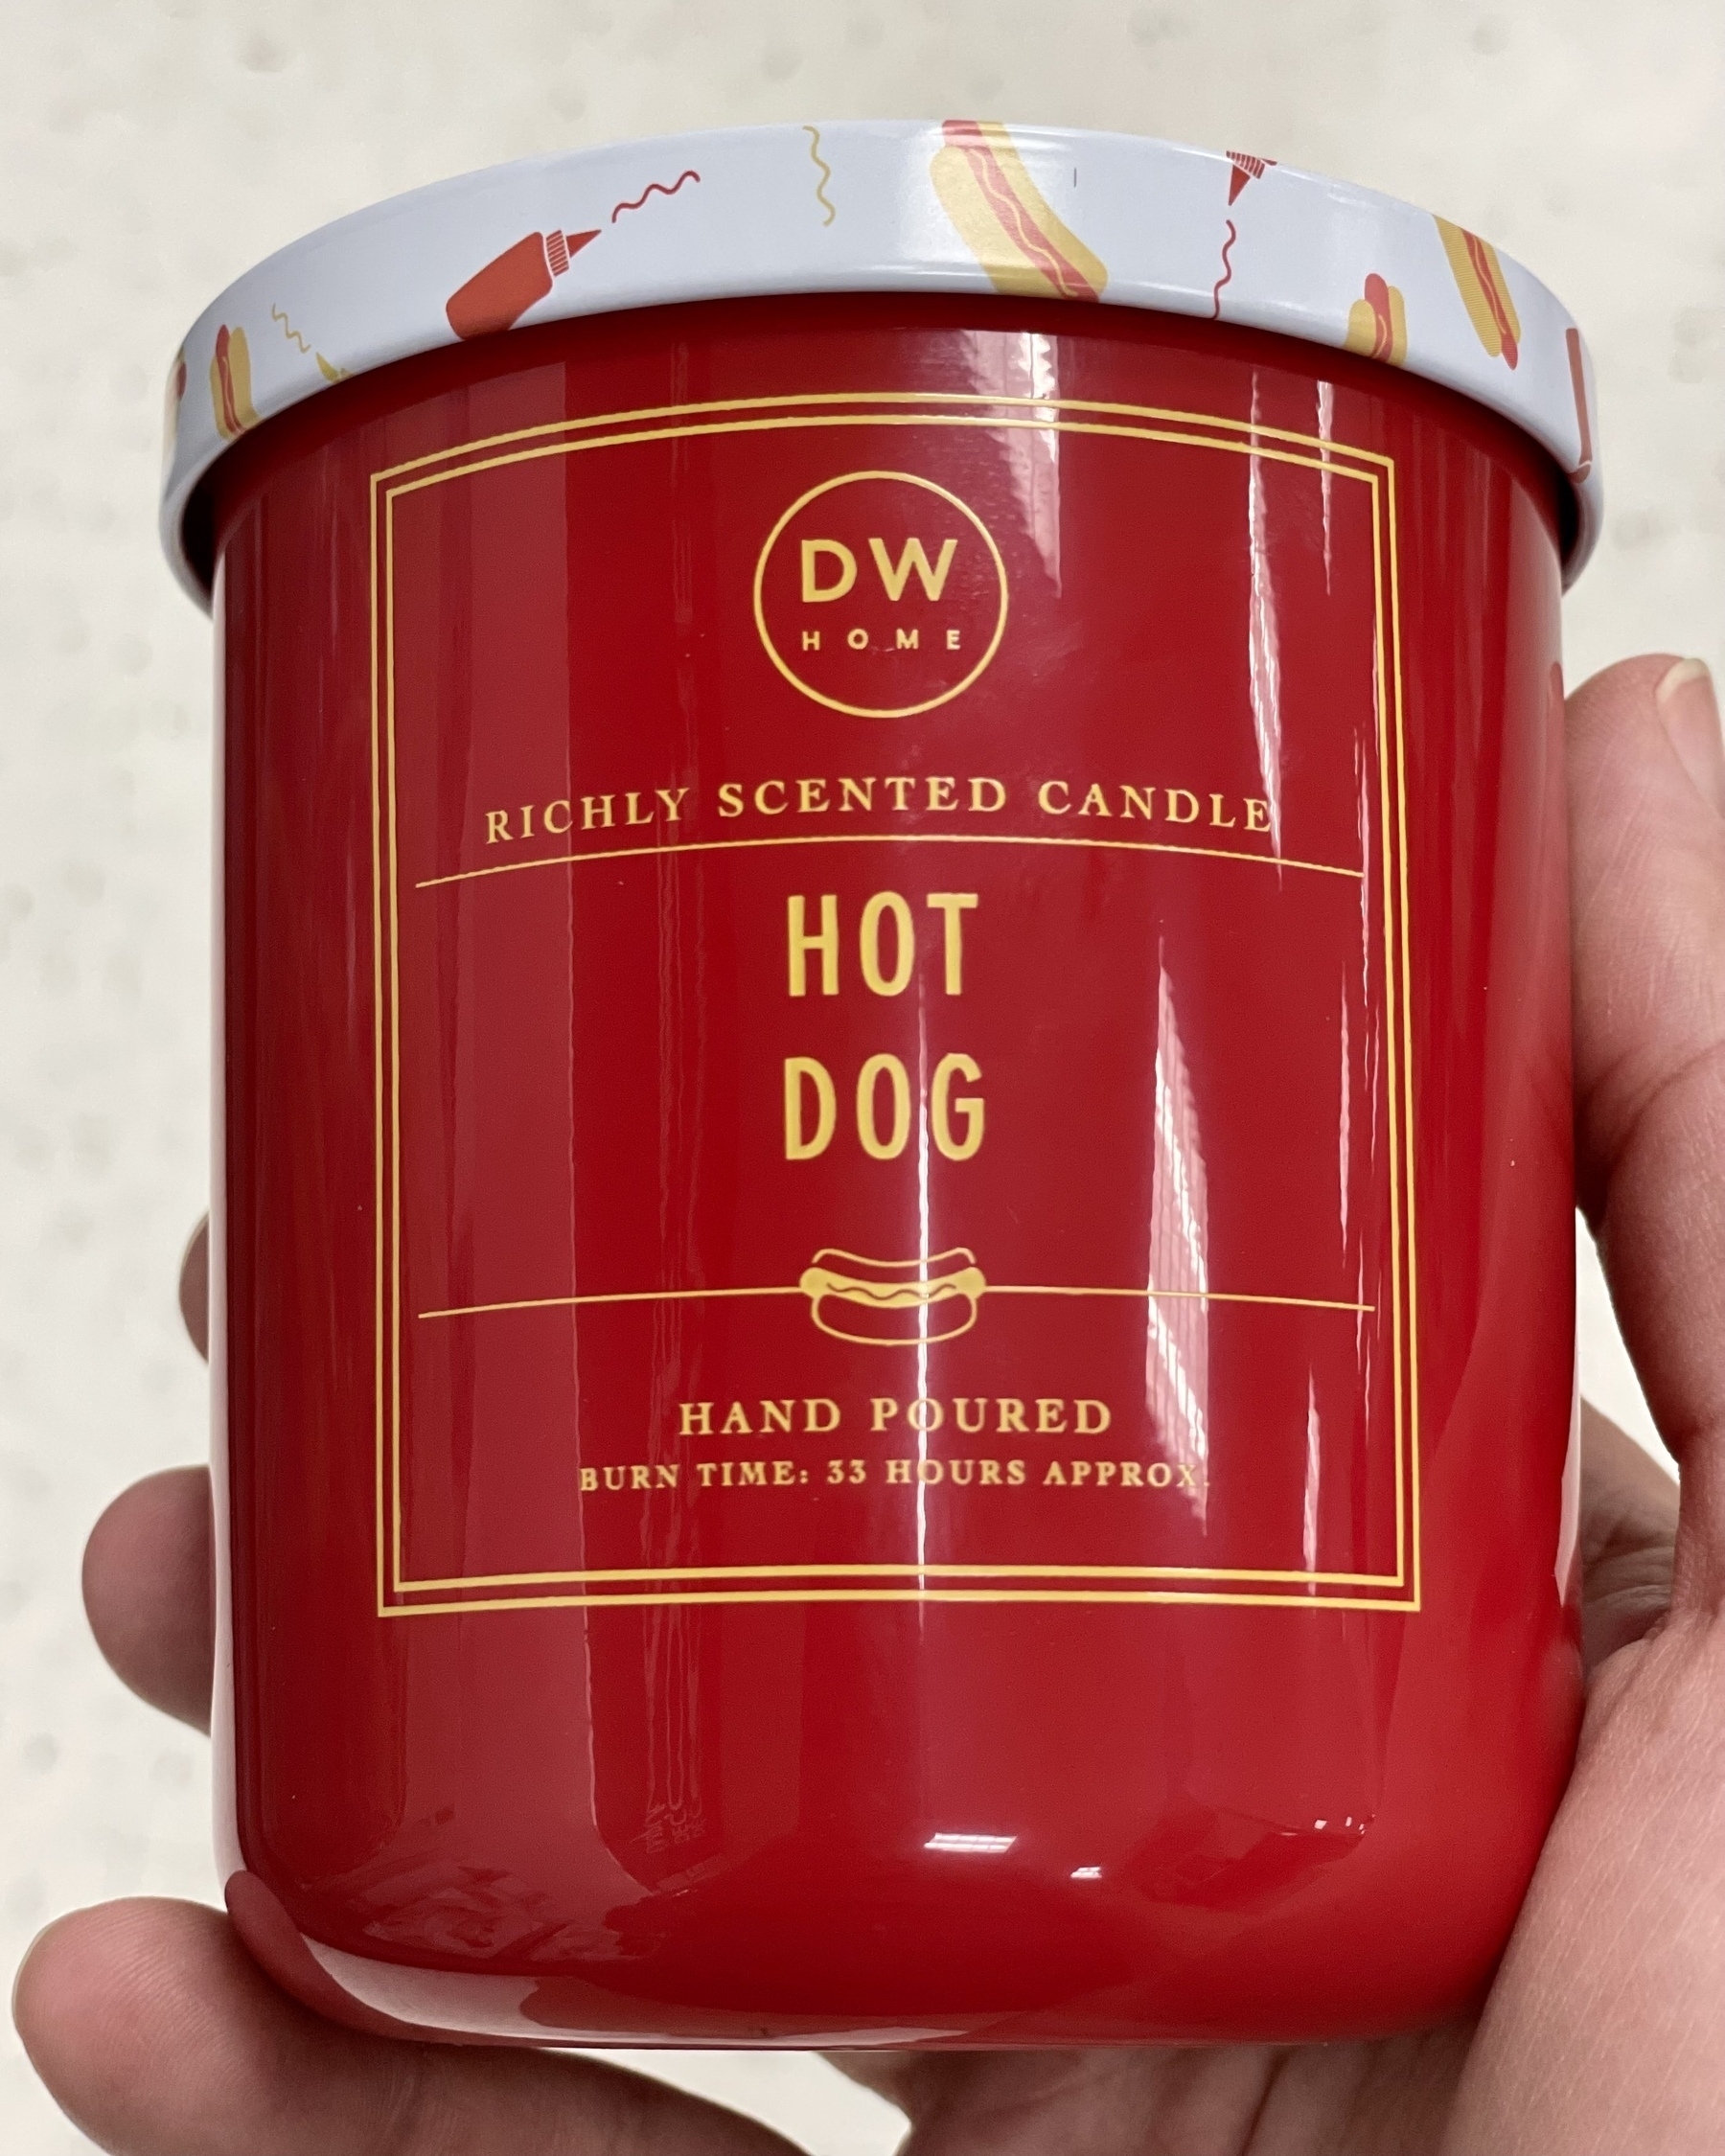 A photo of a scented candle in a red glass jar. The fragrance, "hot dog," is proudly printed on the jar.